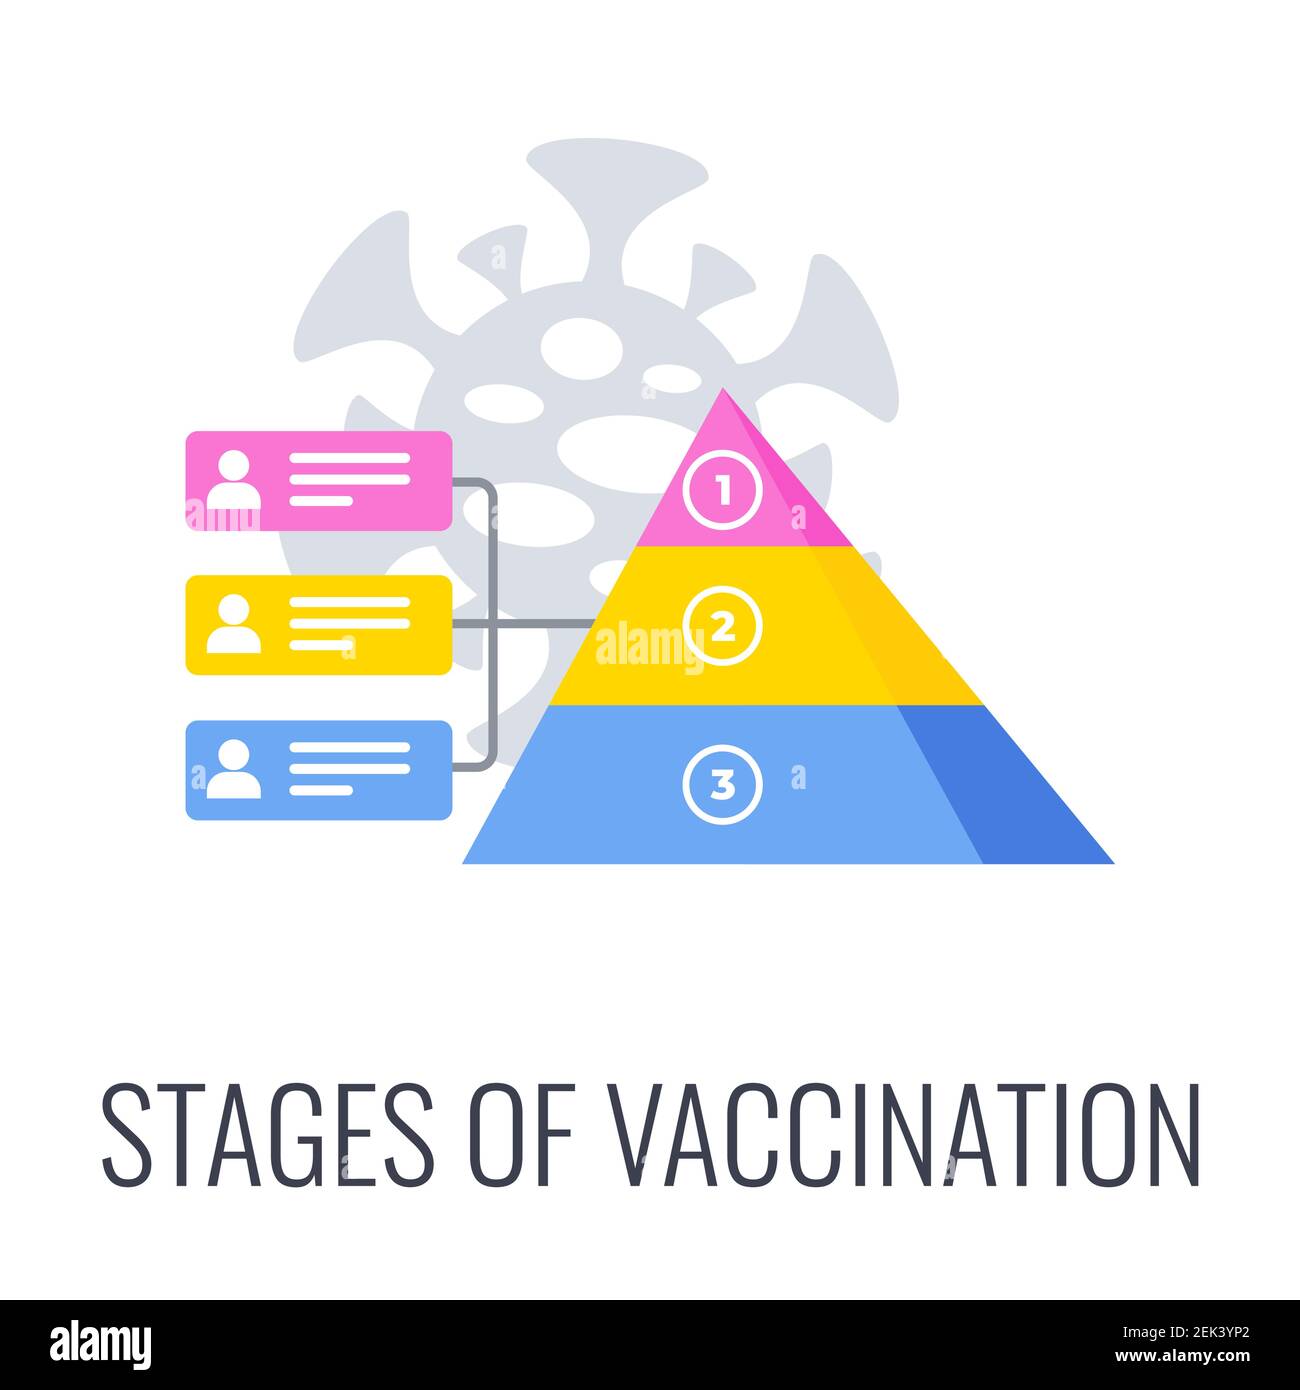 Stages of Vaccination icon. Development, Testing, and Regulation Stock Vector